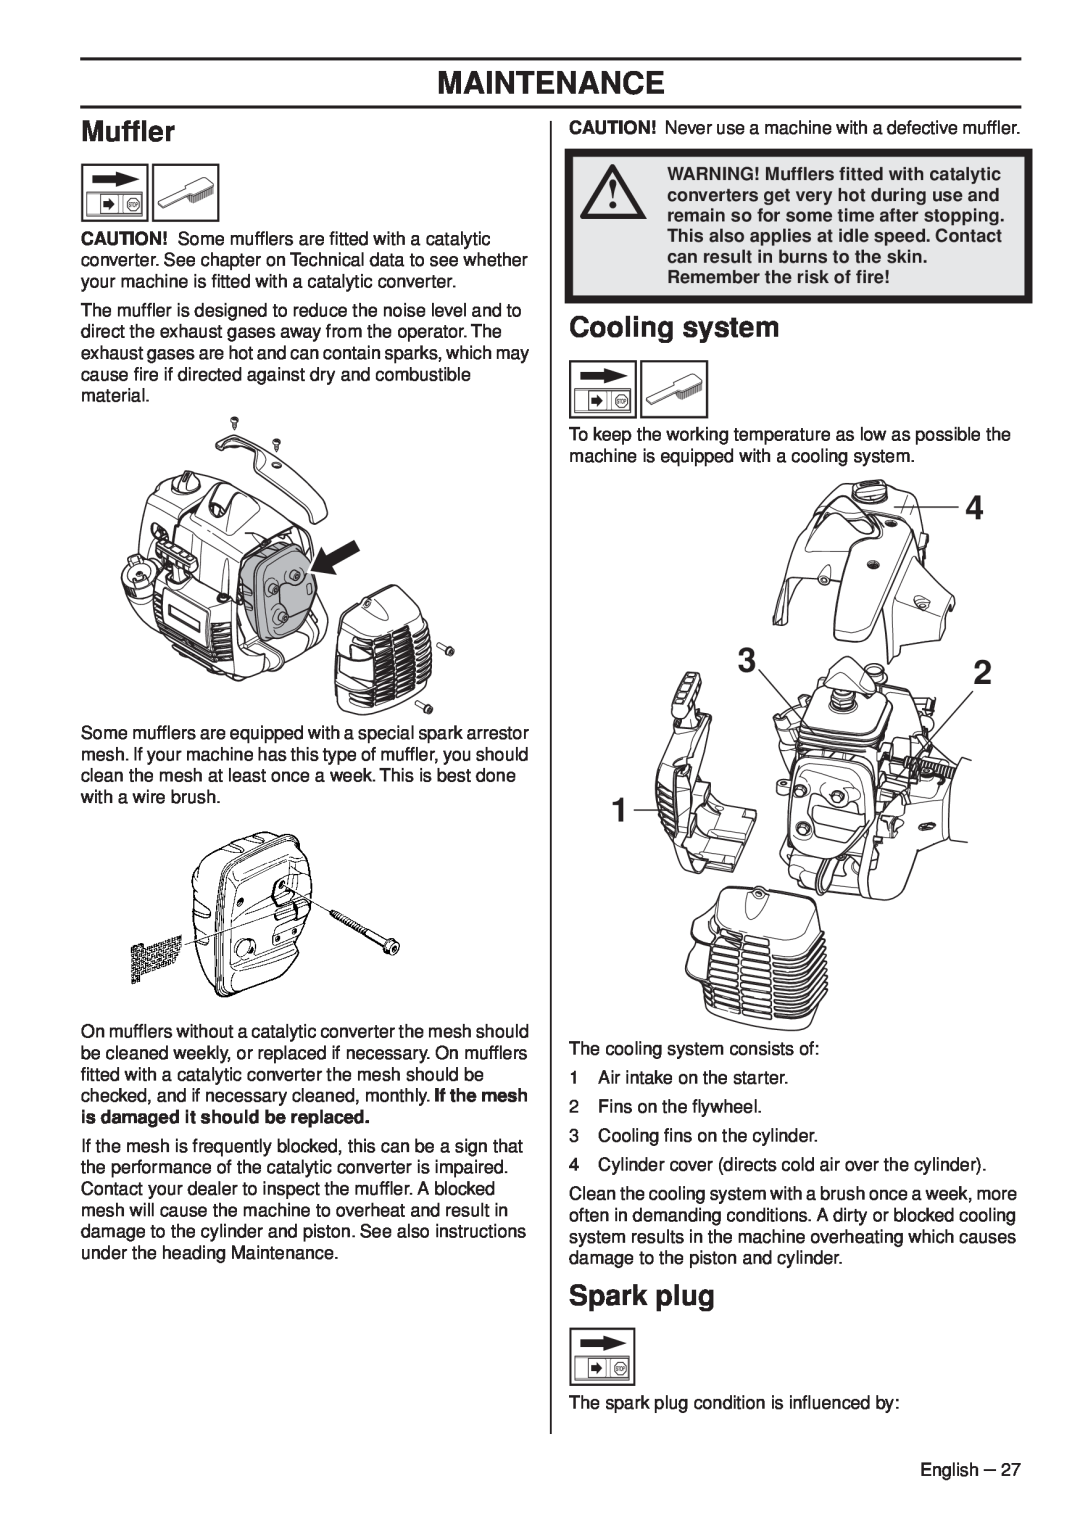 Husqvarna 966976701 manual Mufﬂer, Cooling system, Spark plug, is damaged it should be replaced, Maintenance 